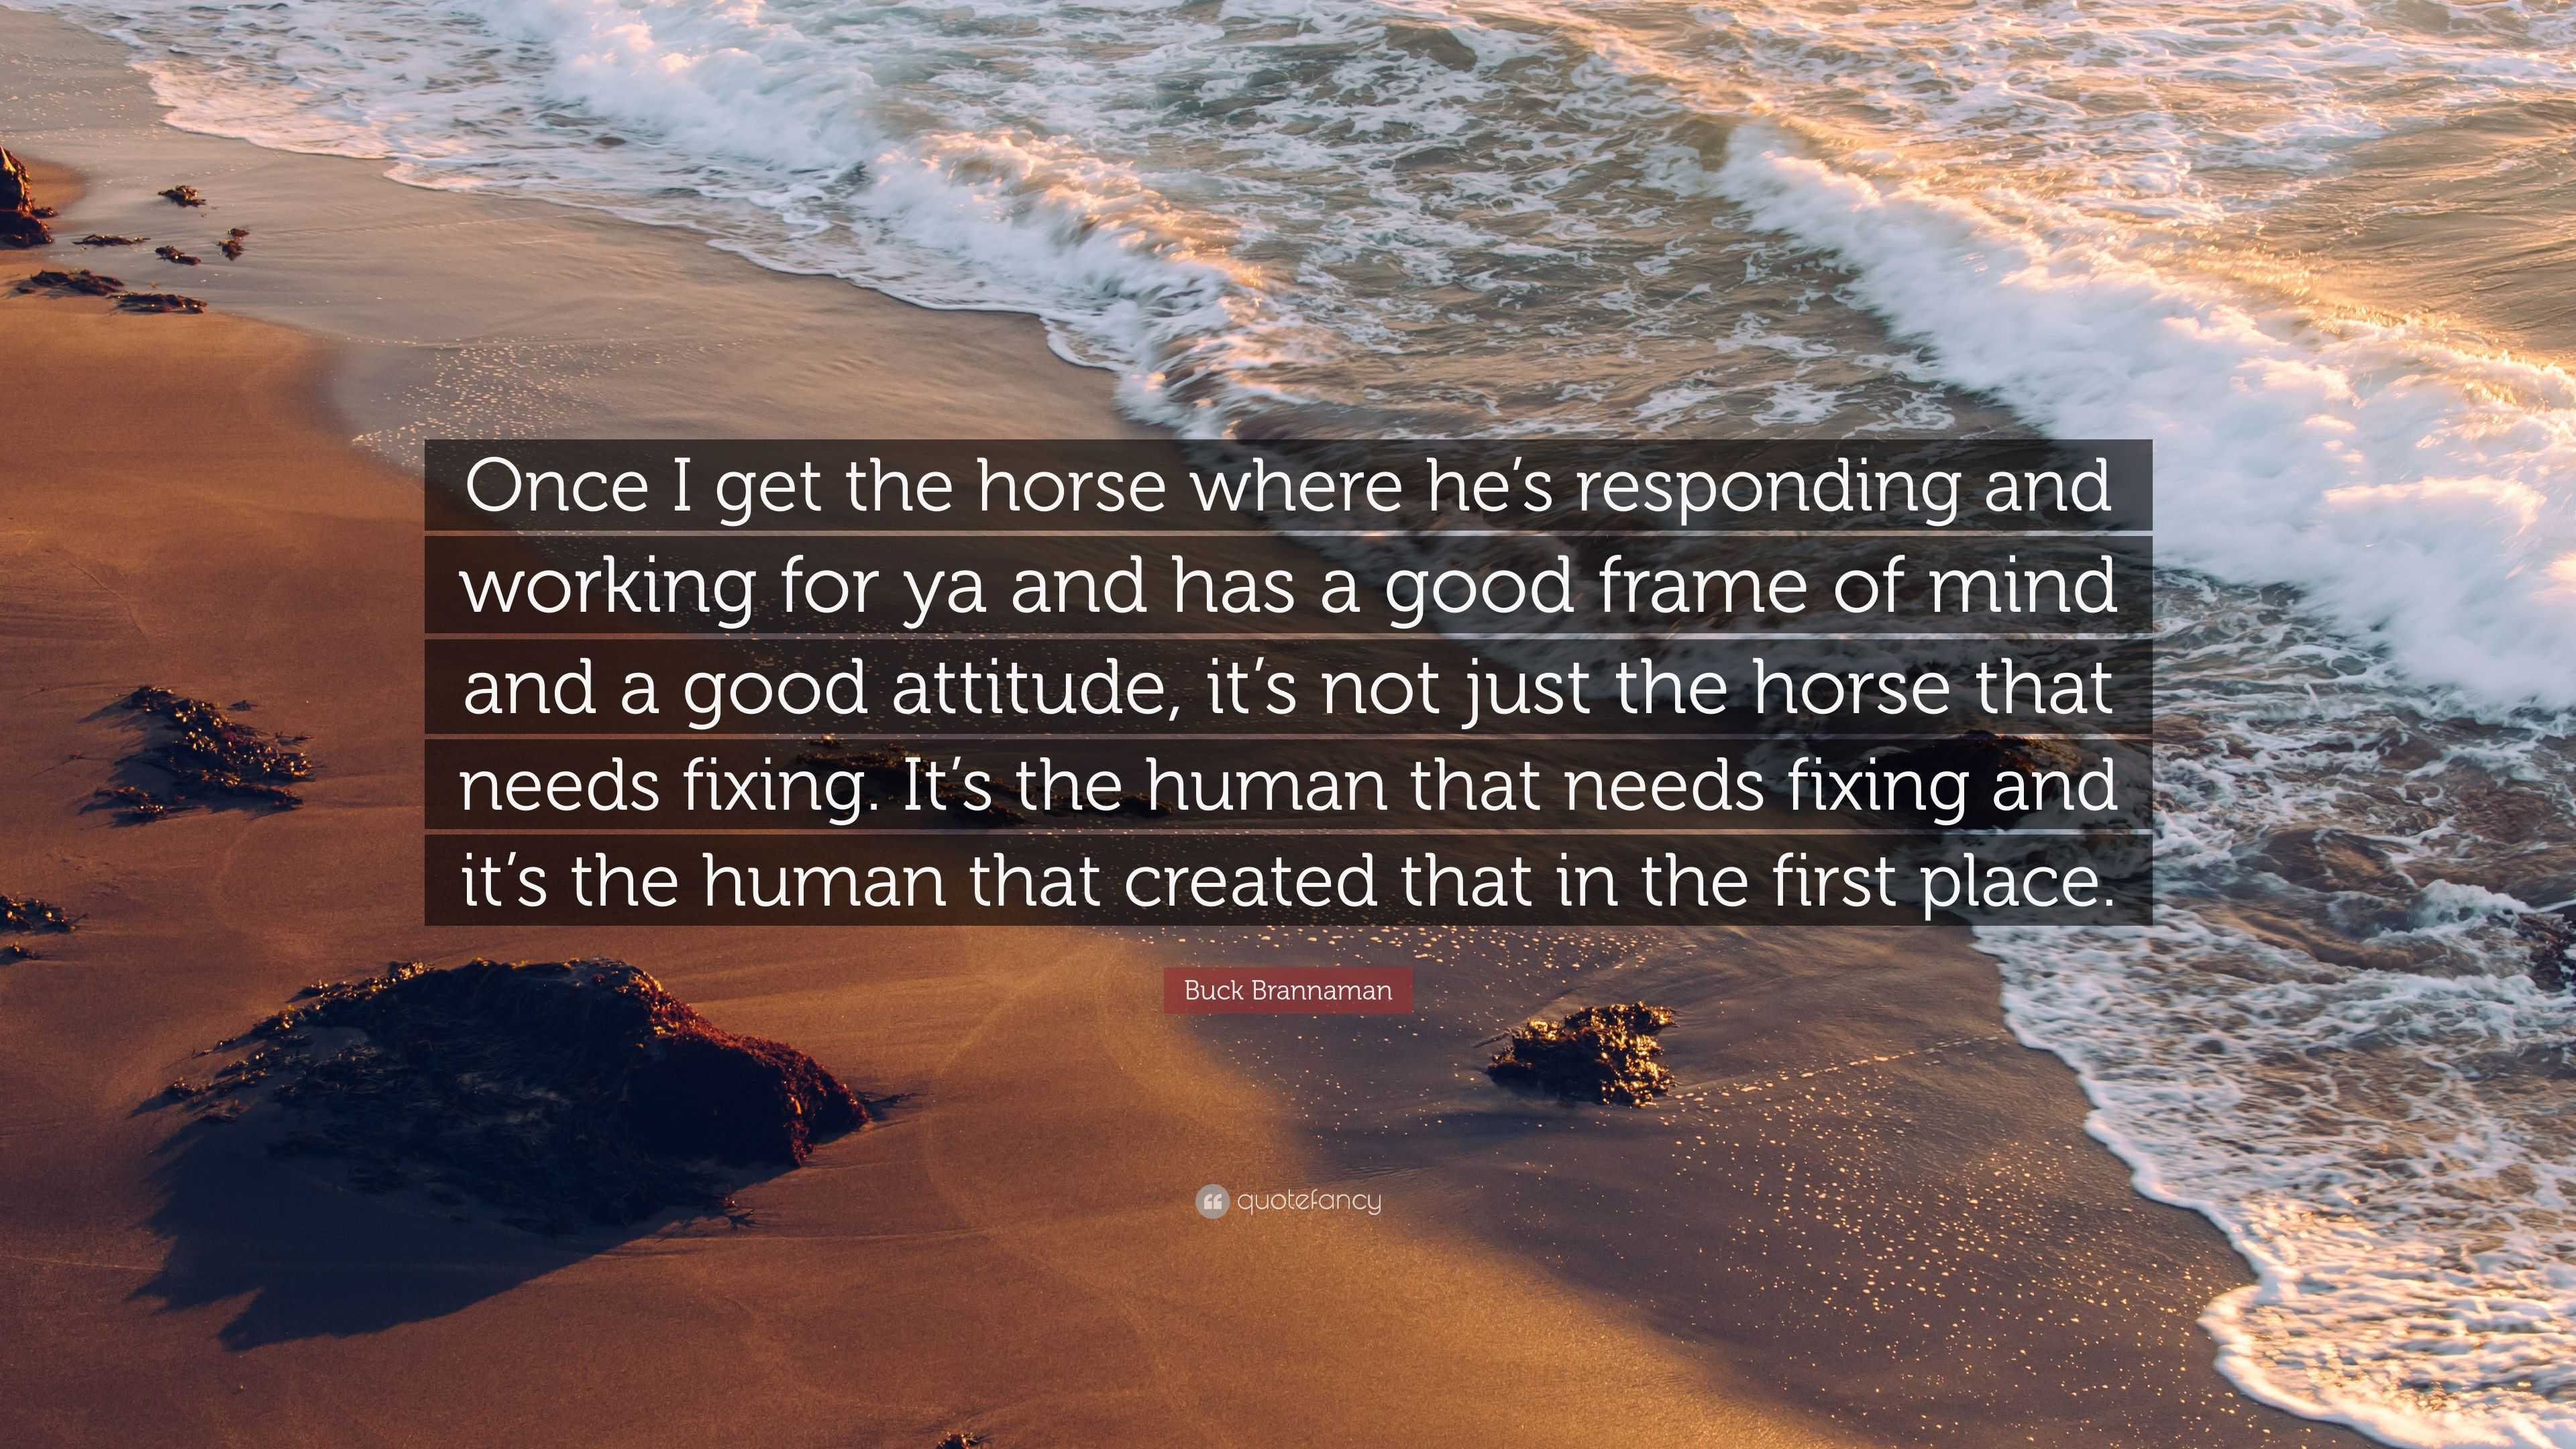 Buck Brannaman Quote: "Once I get the horse where he's responding and working for ya and has a ...